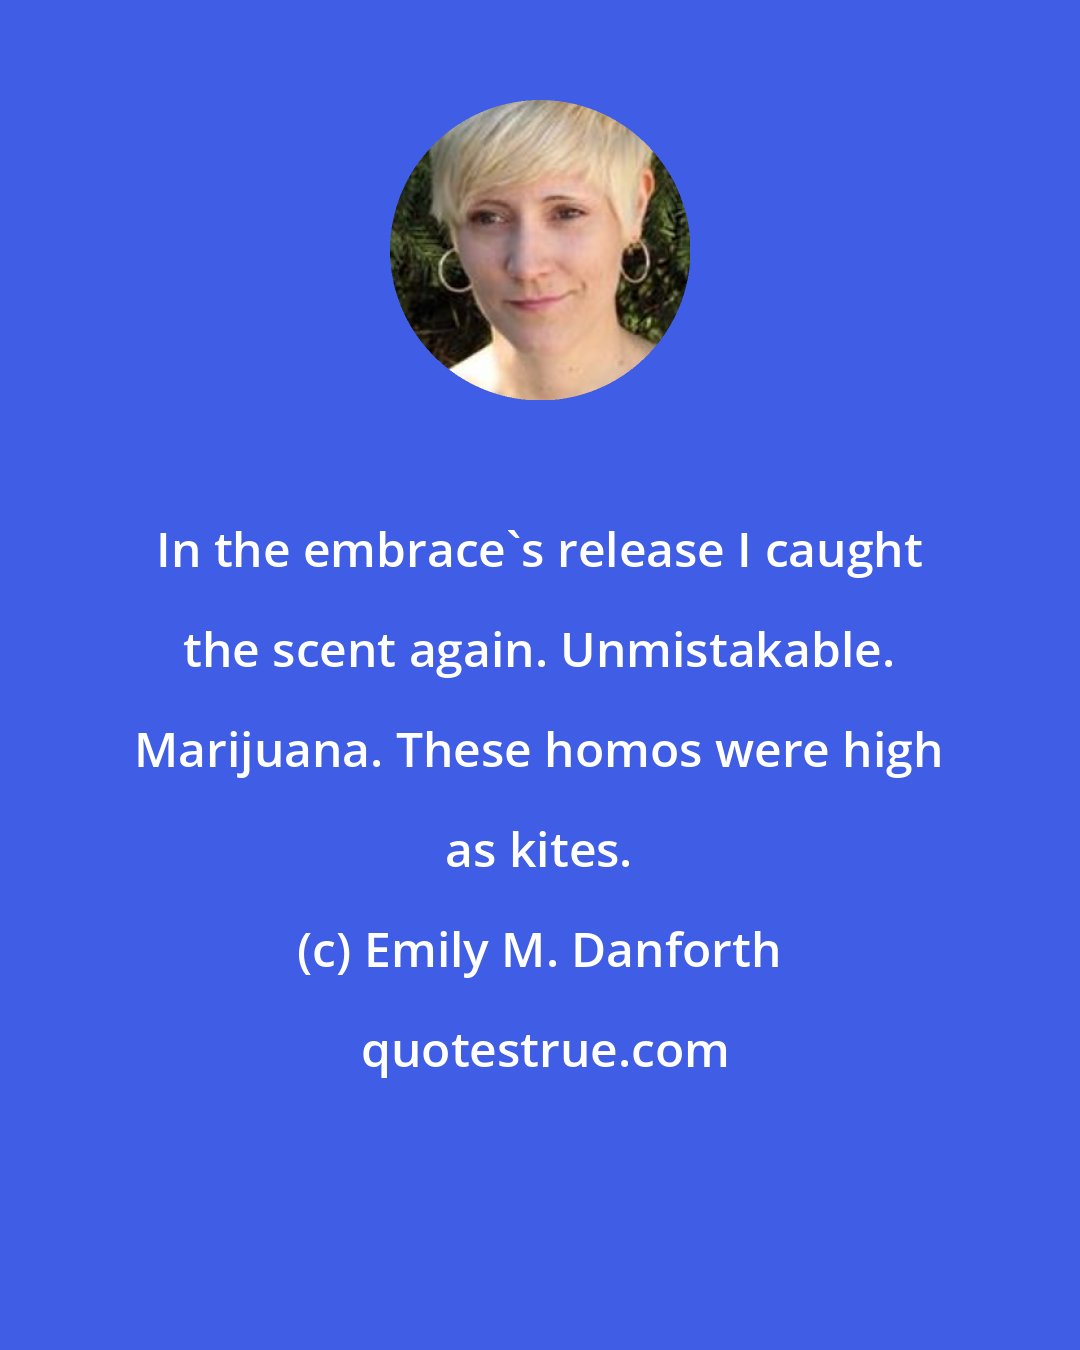 Emily M. Danforth: In the embrace's release I caught the scent again. Unmistakable. Marijuana. These homos were high as kites.